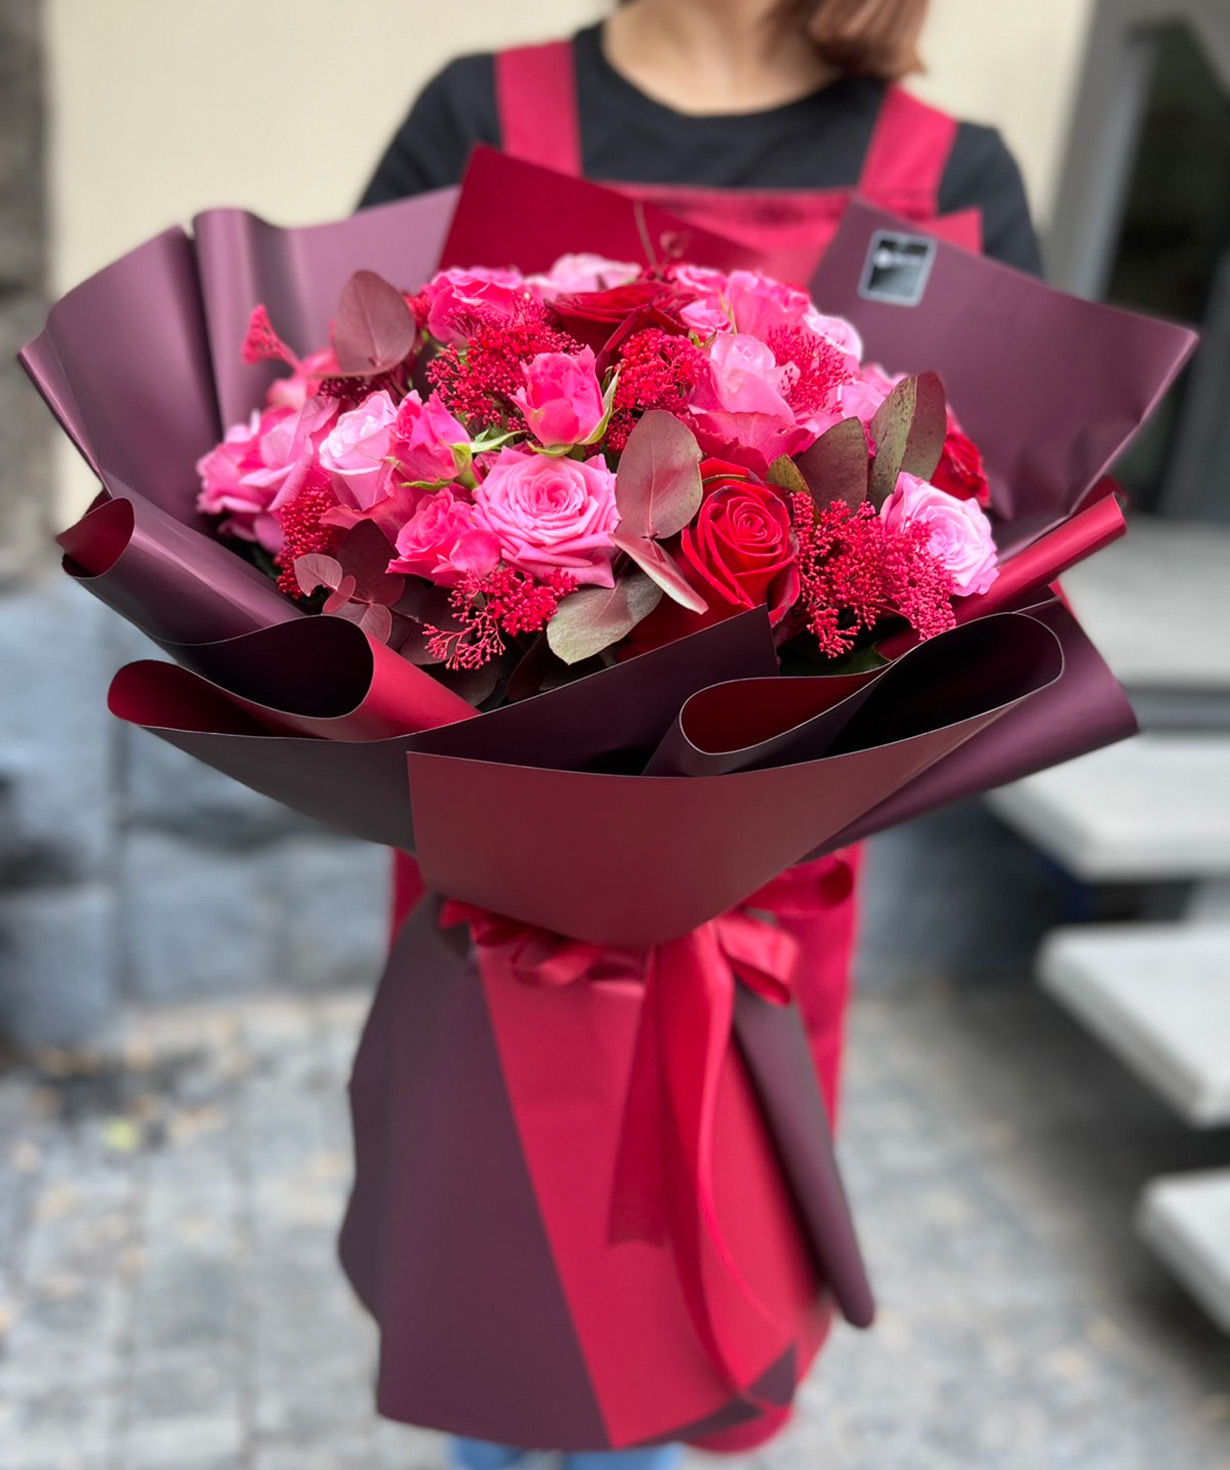 Bouquet `Liski` with roses